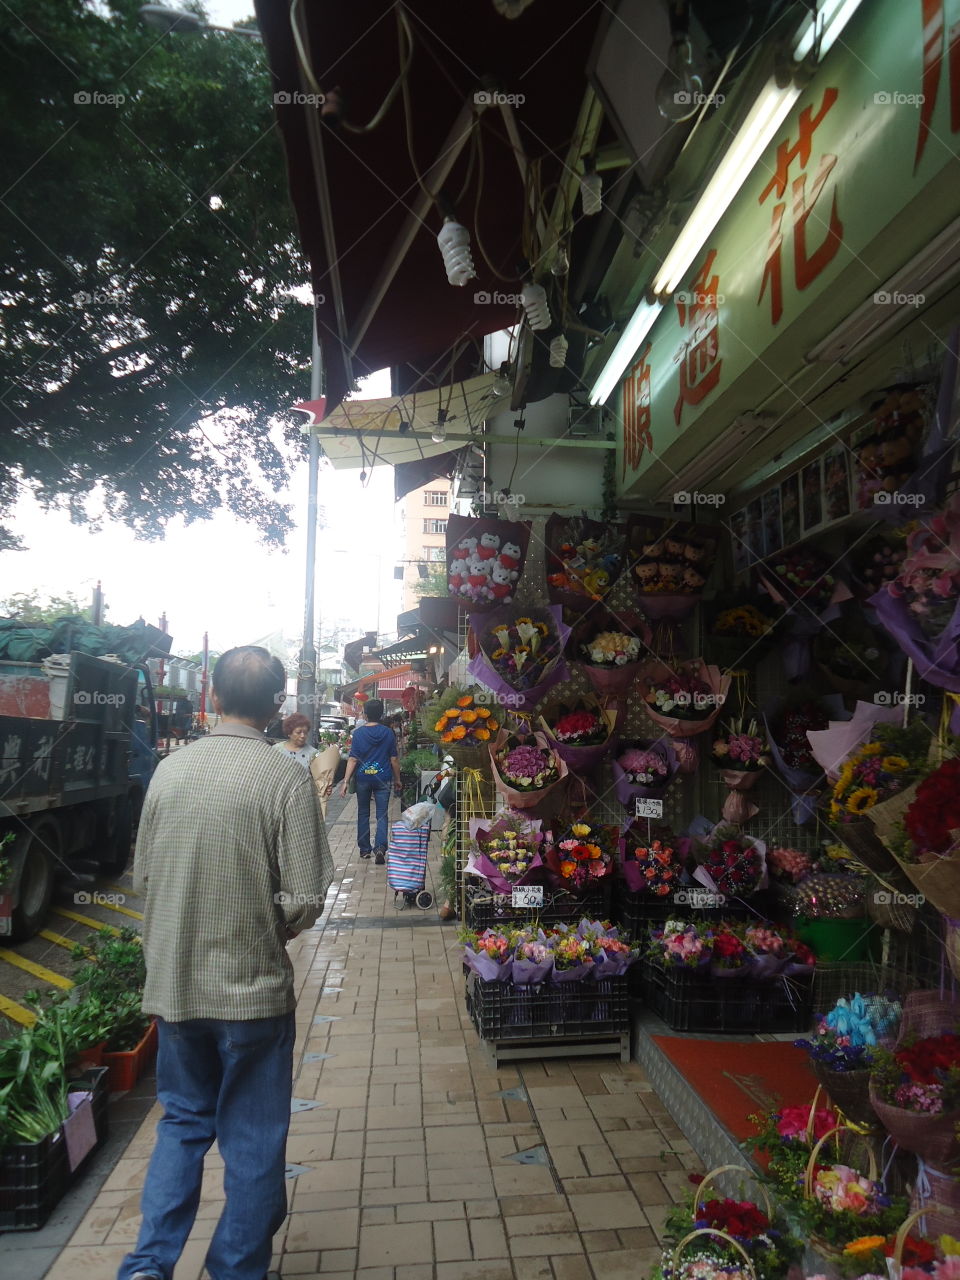 flower market. did not forget to visit the hk flower market on our trip